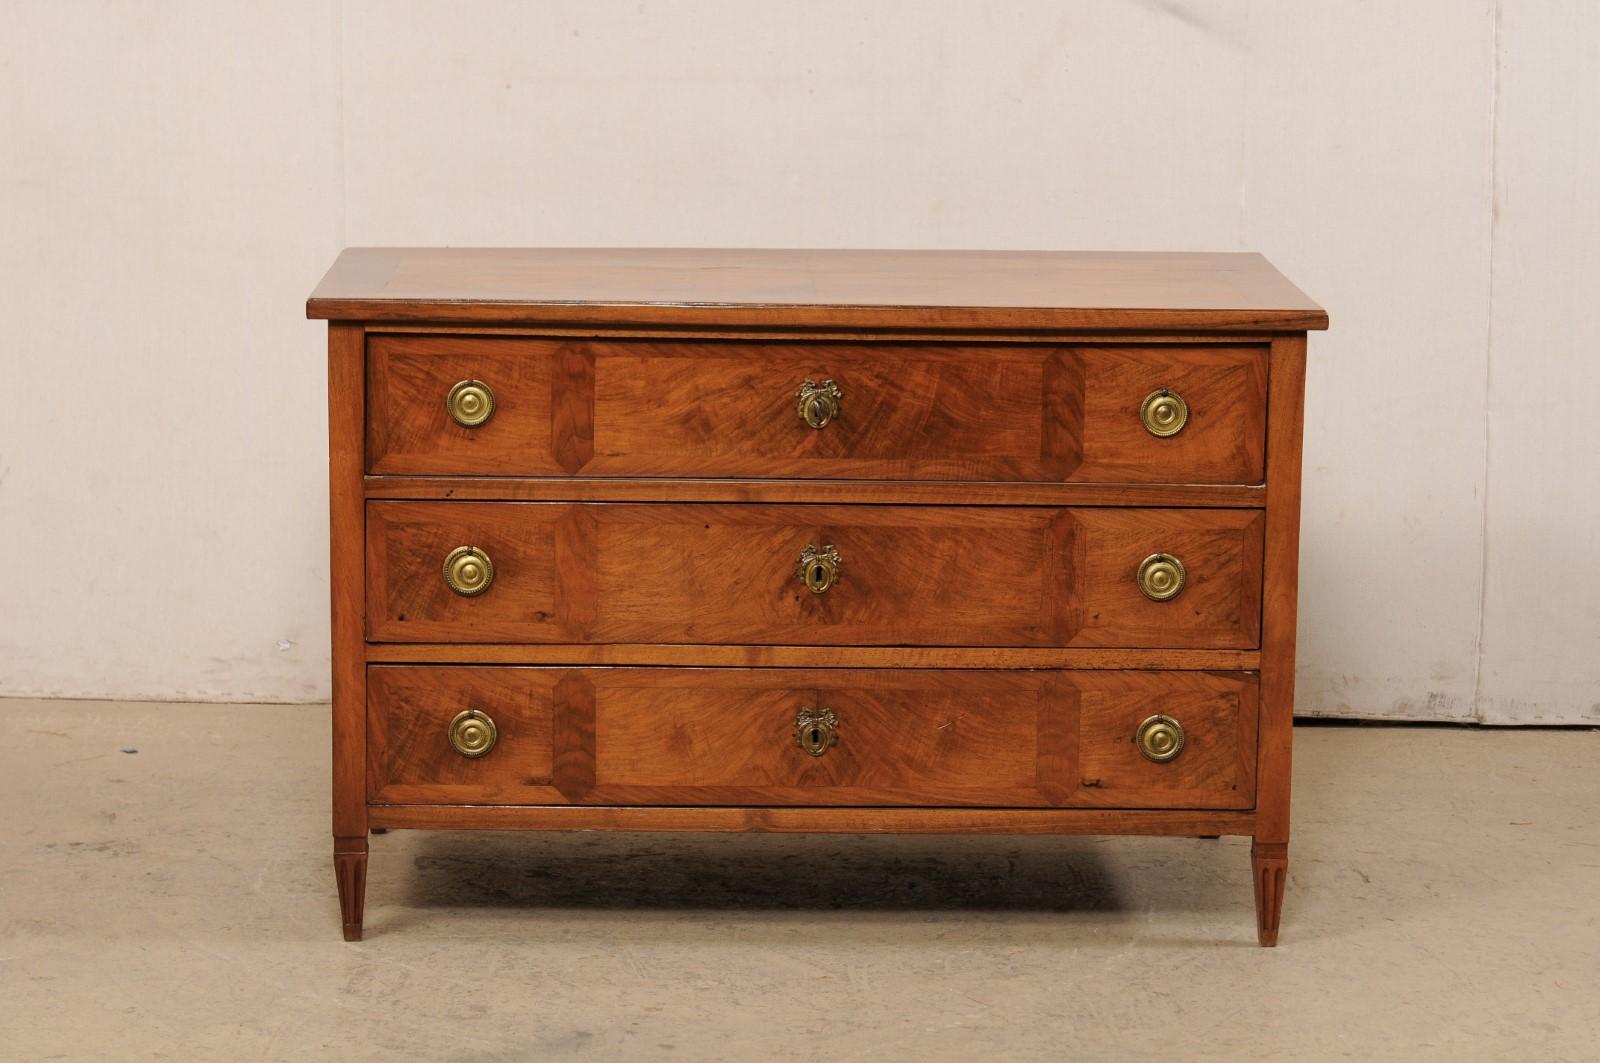 French Neoclassic Period Commode with Beautiful Veneered Finish & Brass Hardware For Sale 7